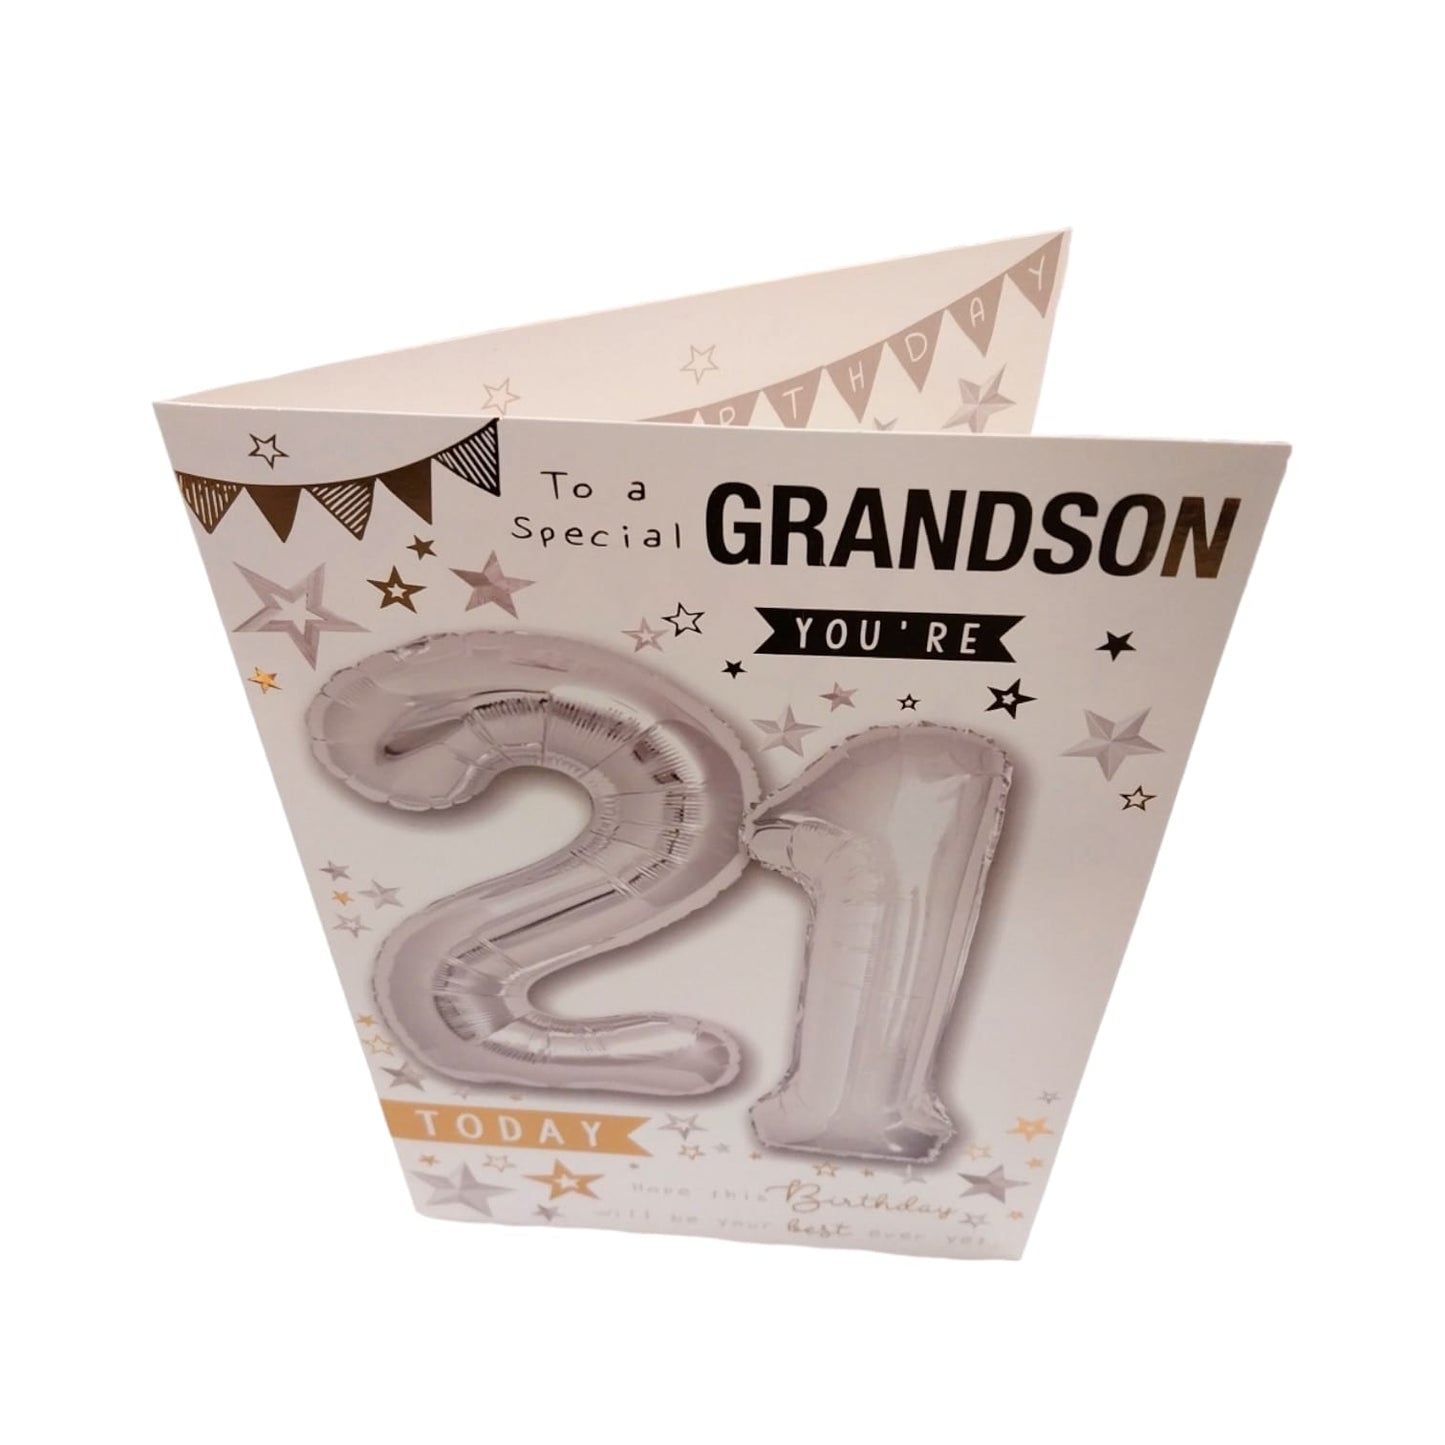 To a Special Grandson You're 21 Balloon Boutique Greeting Card